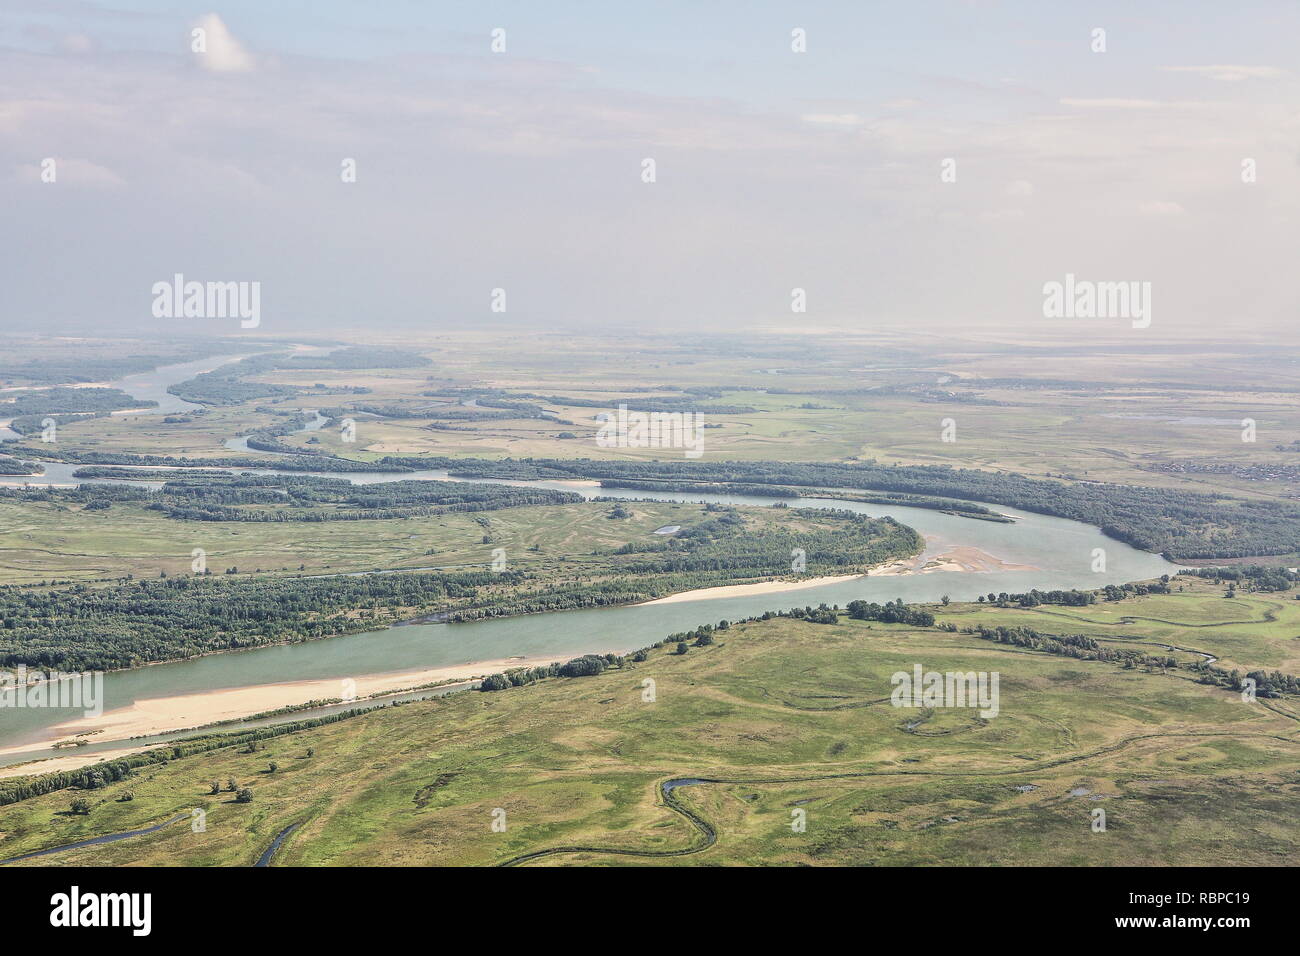 Aerial view of Irtysh river,(Ertis-Kaz,额尔齐斯河-Eerqisihe - Chinese), in  Kazakhstan, flows from south, enters Ob river, its waters end in Arctic, Russia Stock Photo